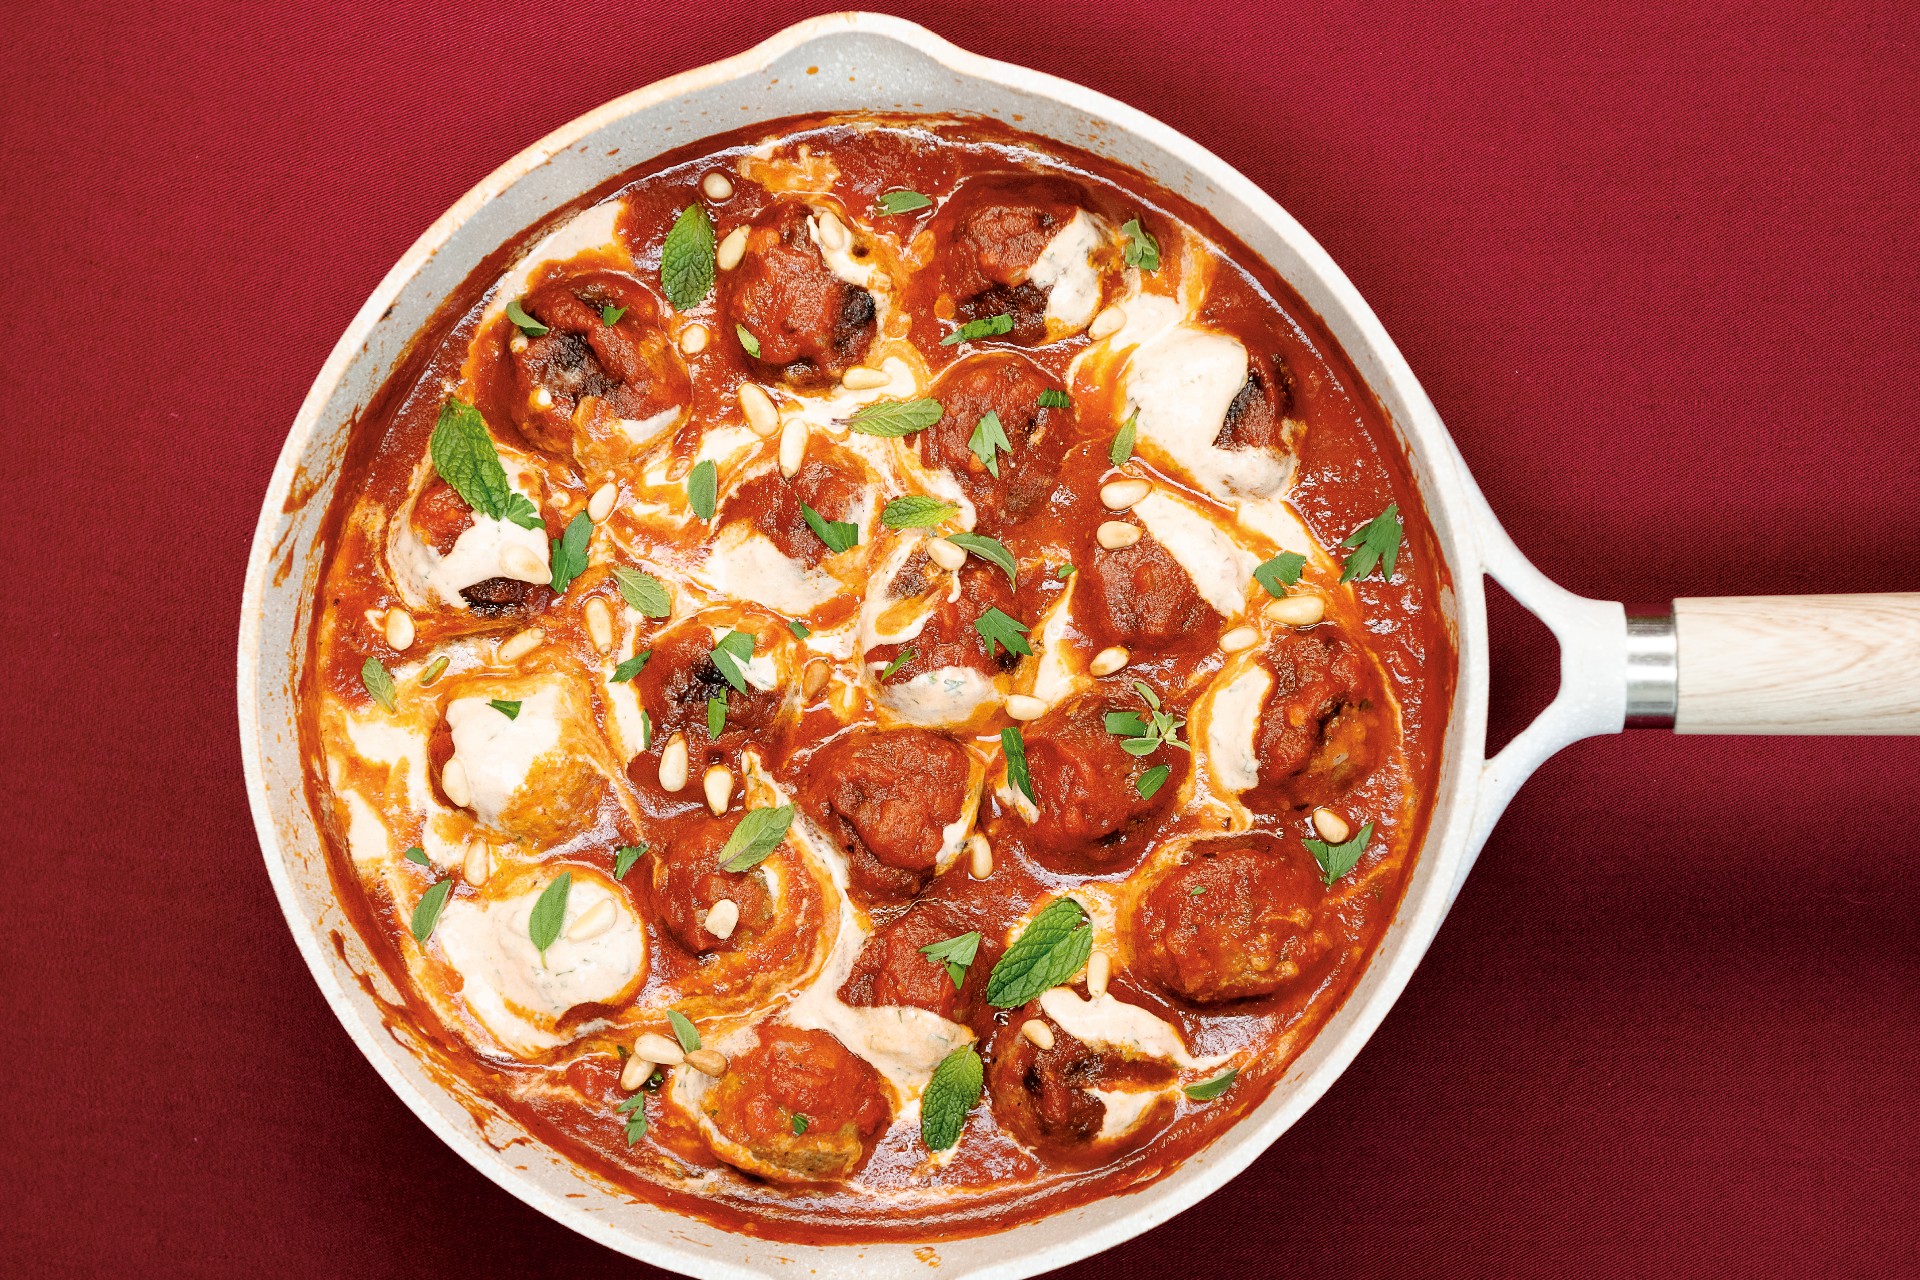 Skillet with saucy lamb meatballs